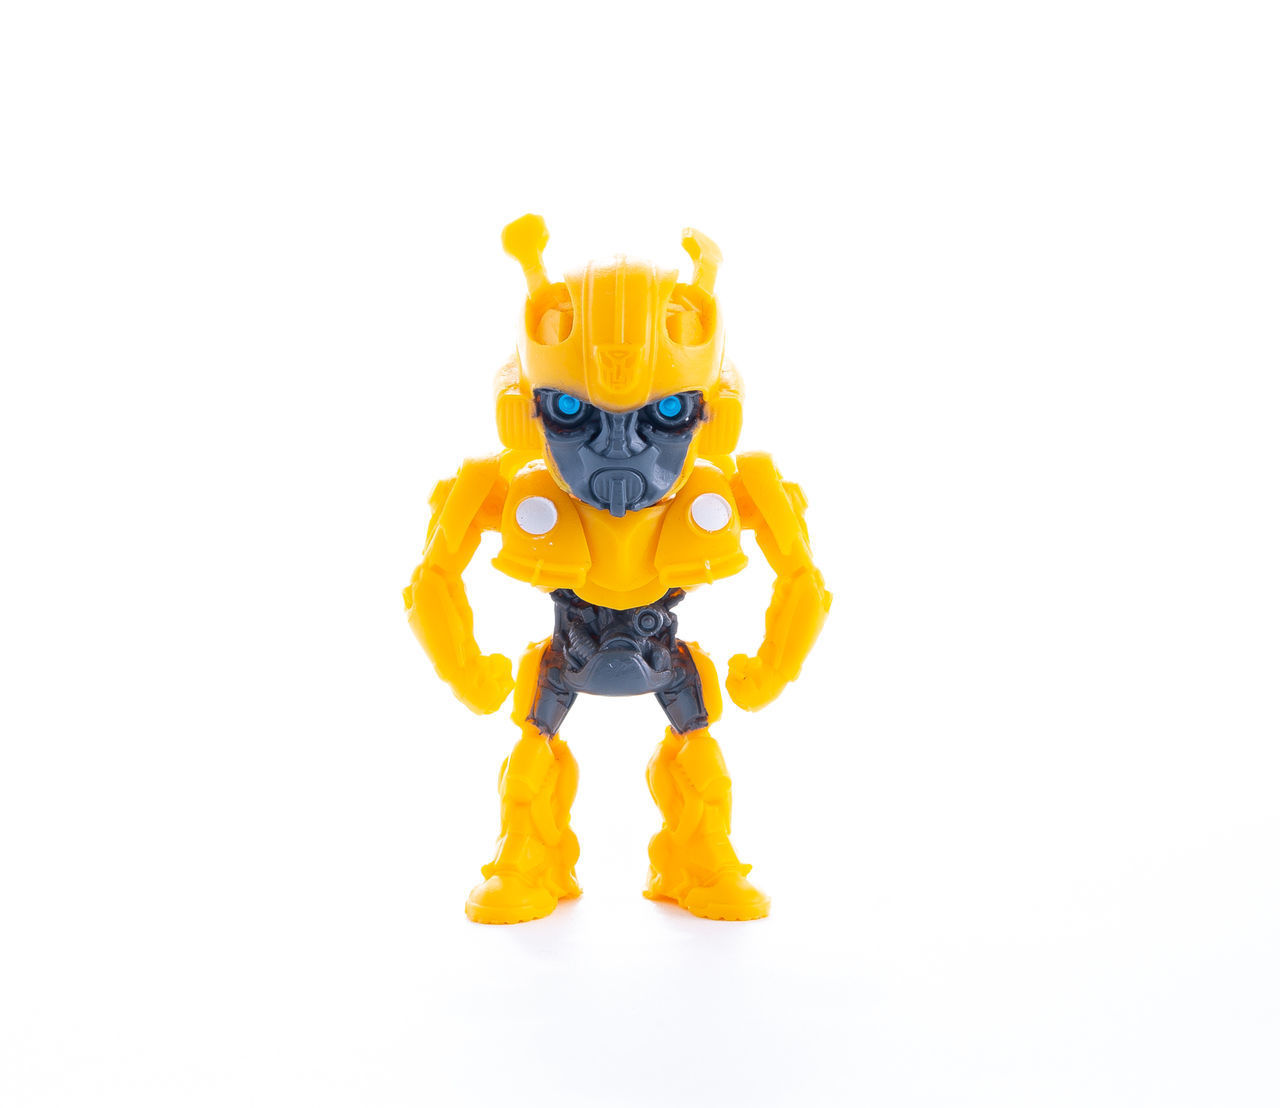 CLOSE-UP OF YELLOW TOY ON WHITE BACKGROUND